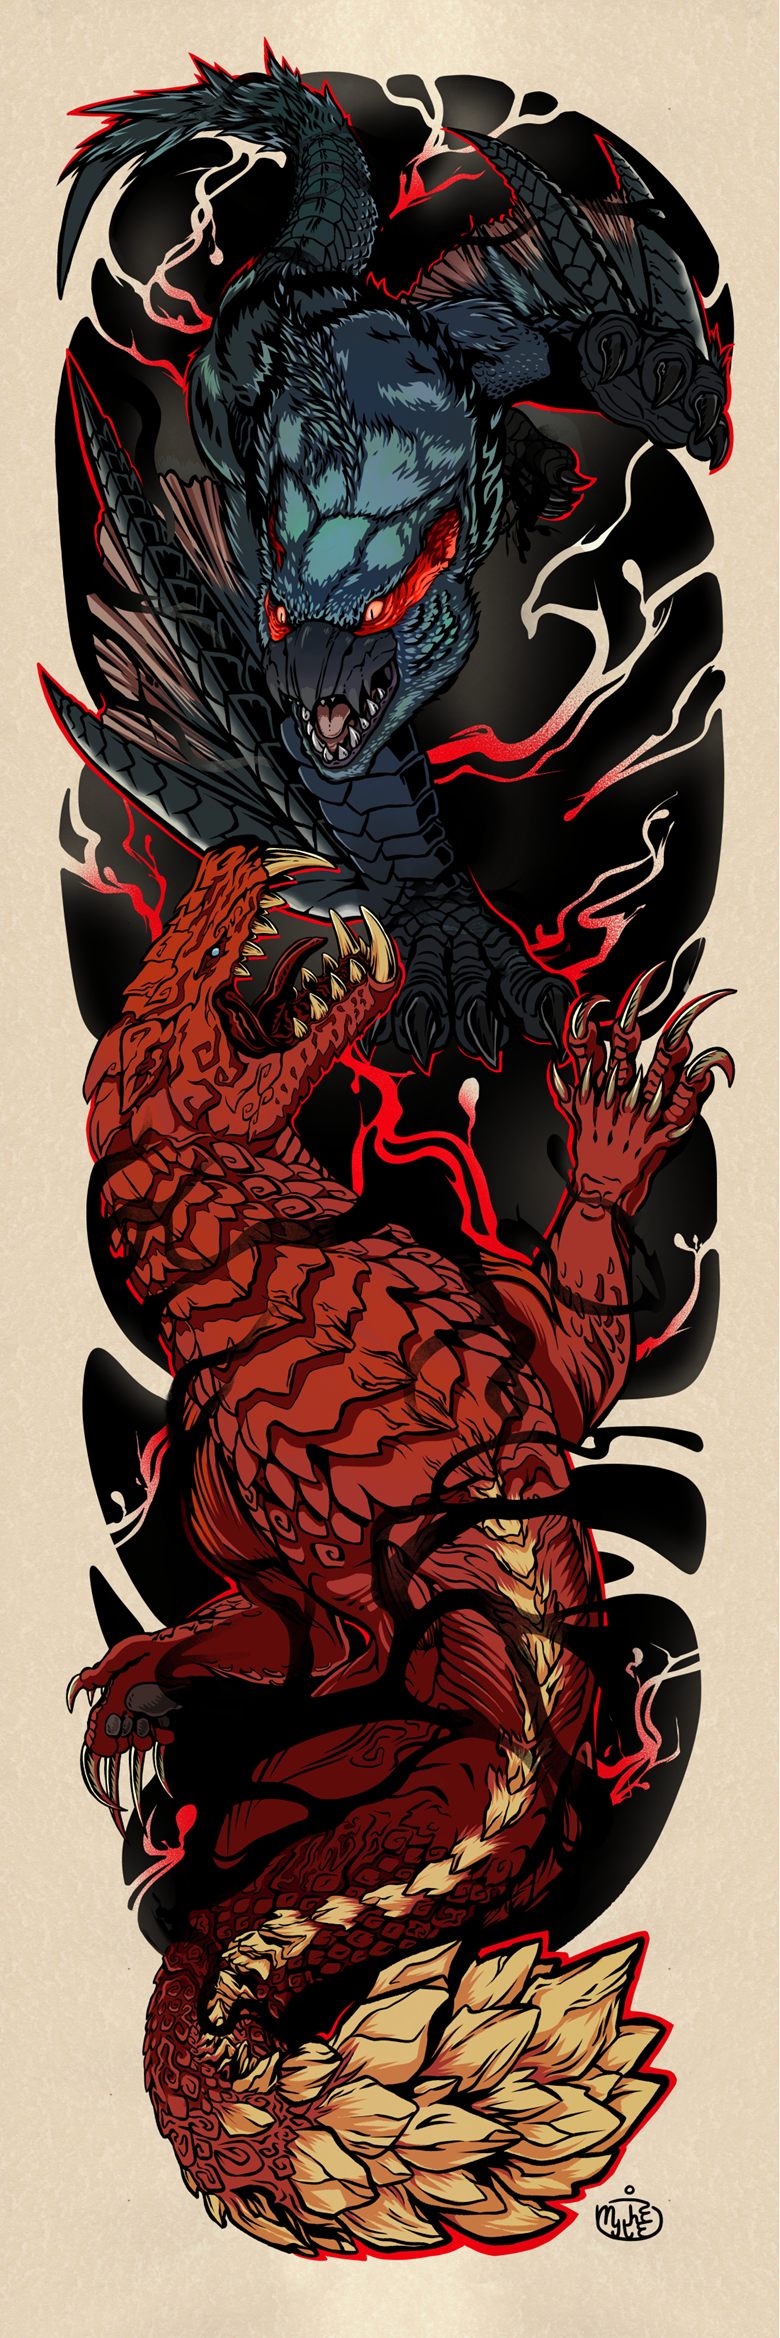 A commission for a tattoo design depicting a bloody territorial dispute between two monsters from Capcom's Monster Hunter franchise.